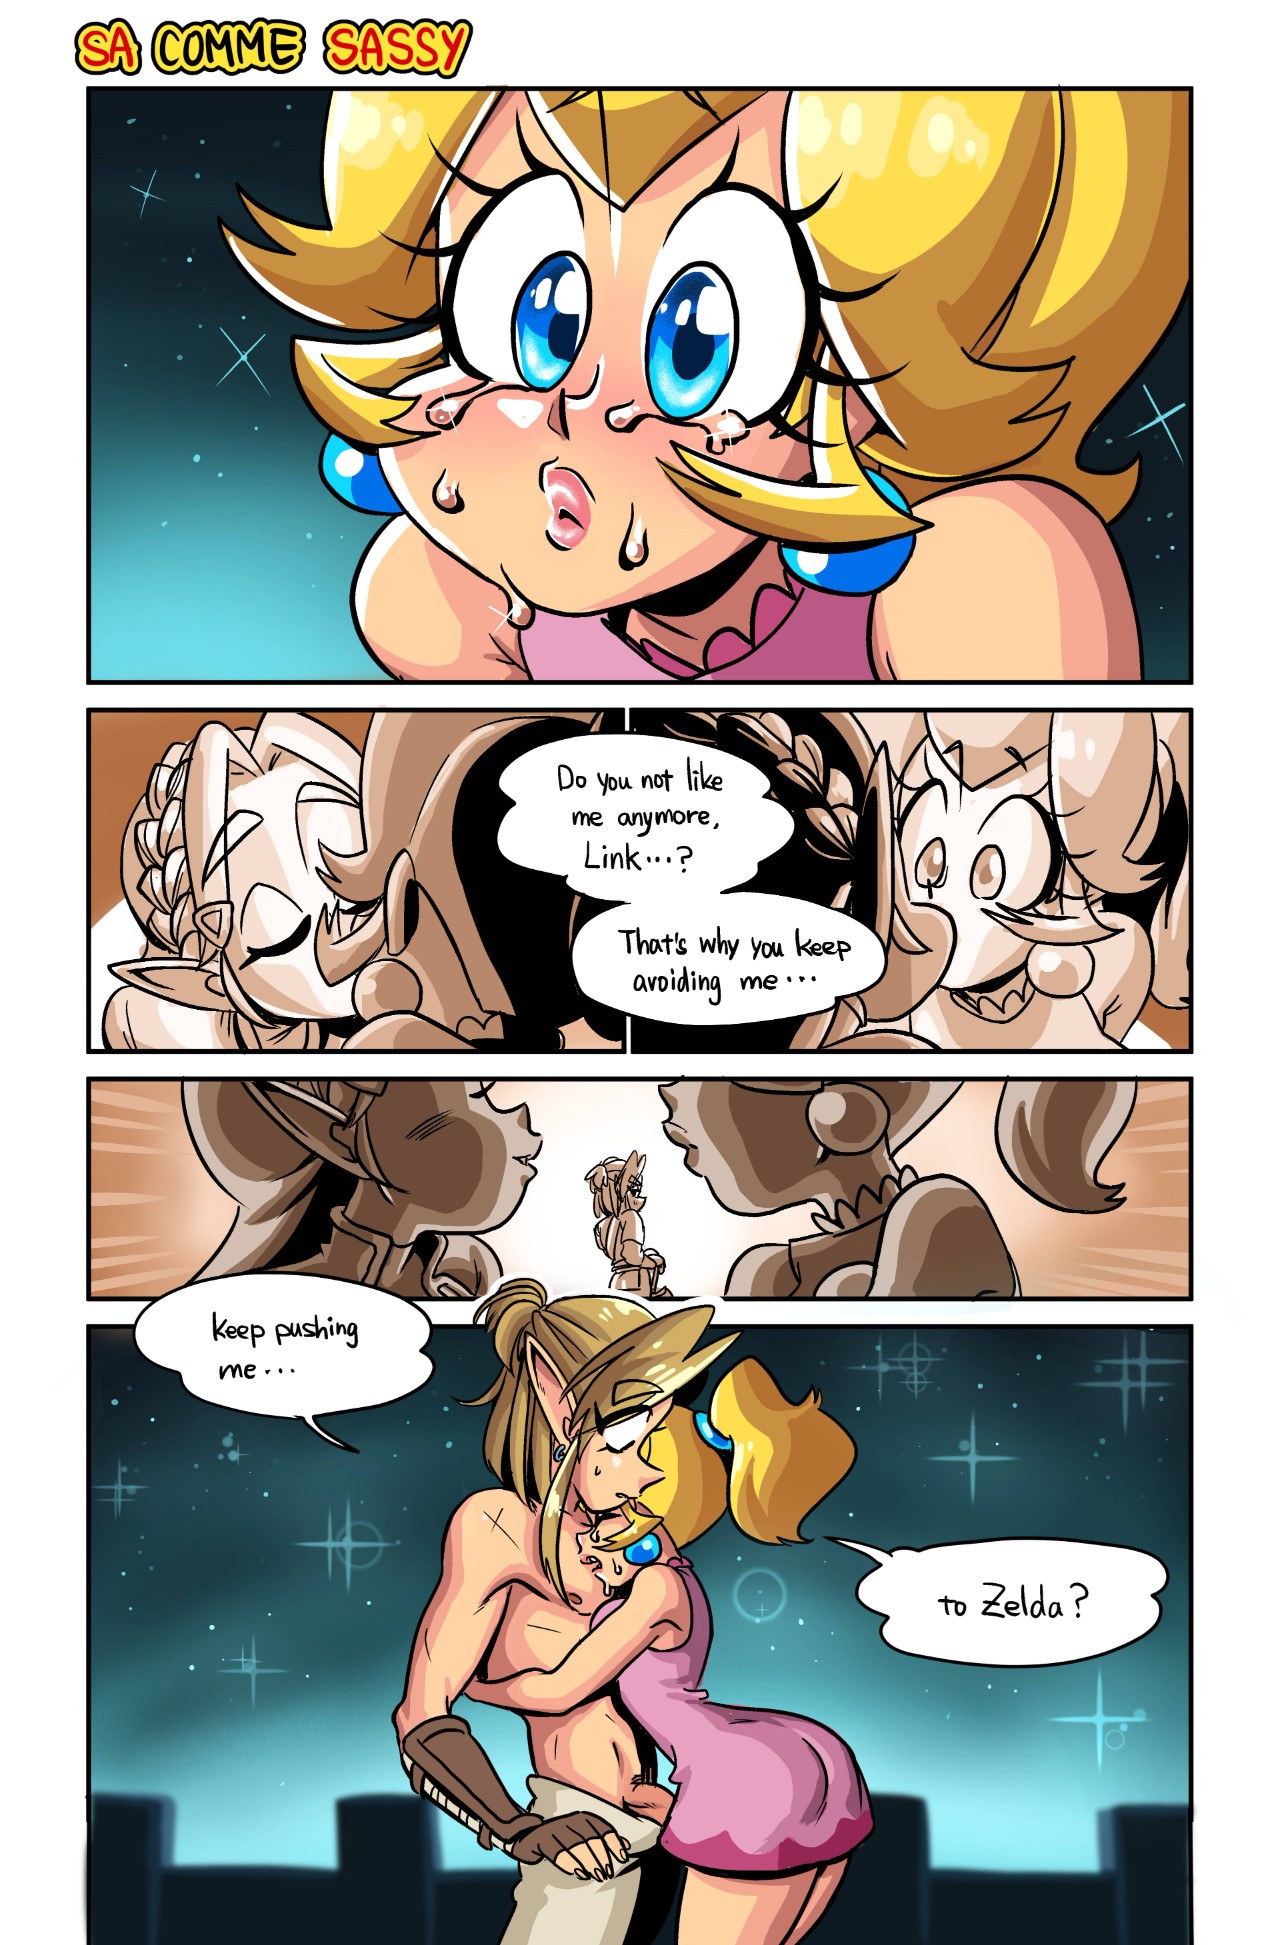 Peach Perfect Part 2: The Hero Of Hyrule Porn Comic english 08